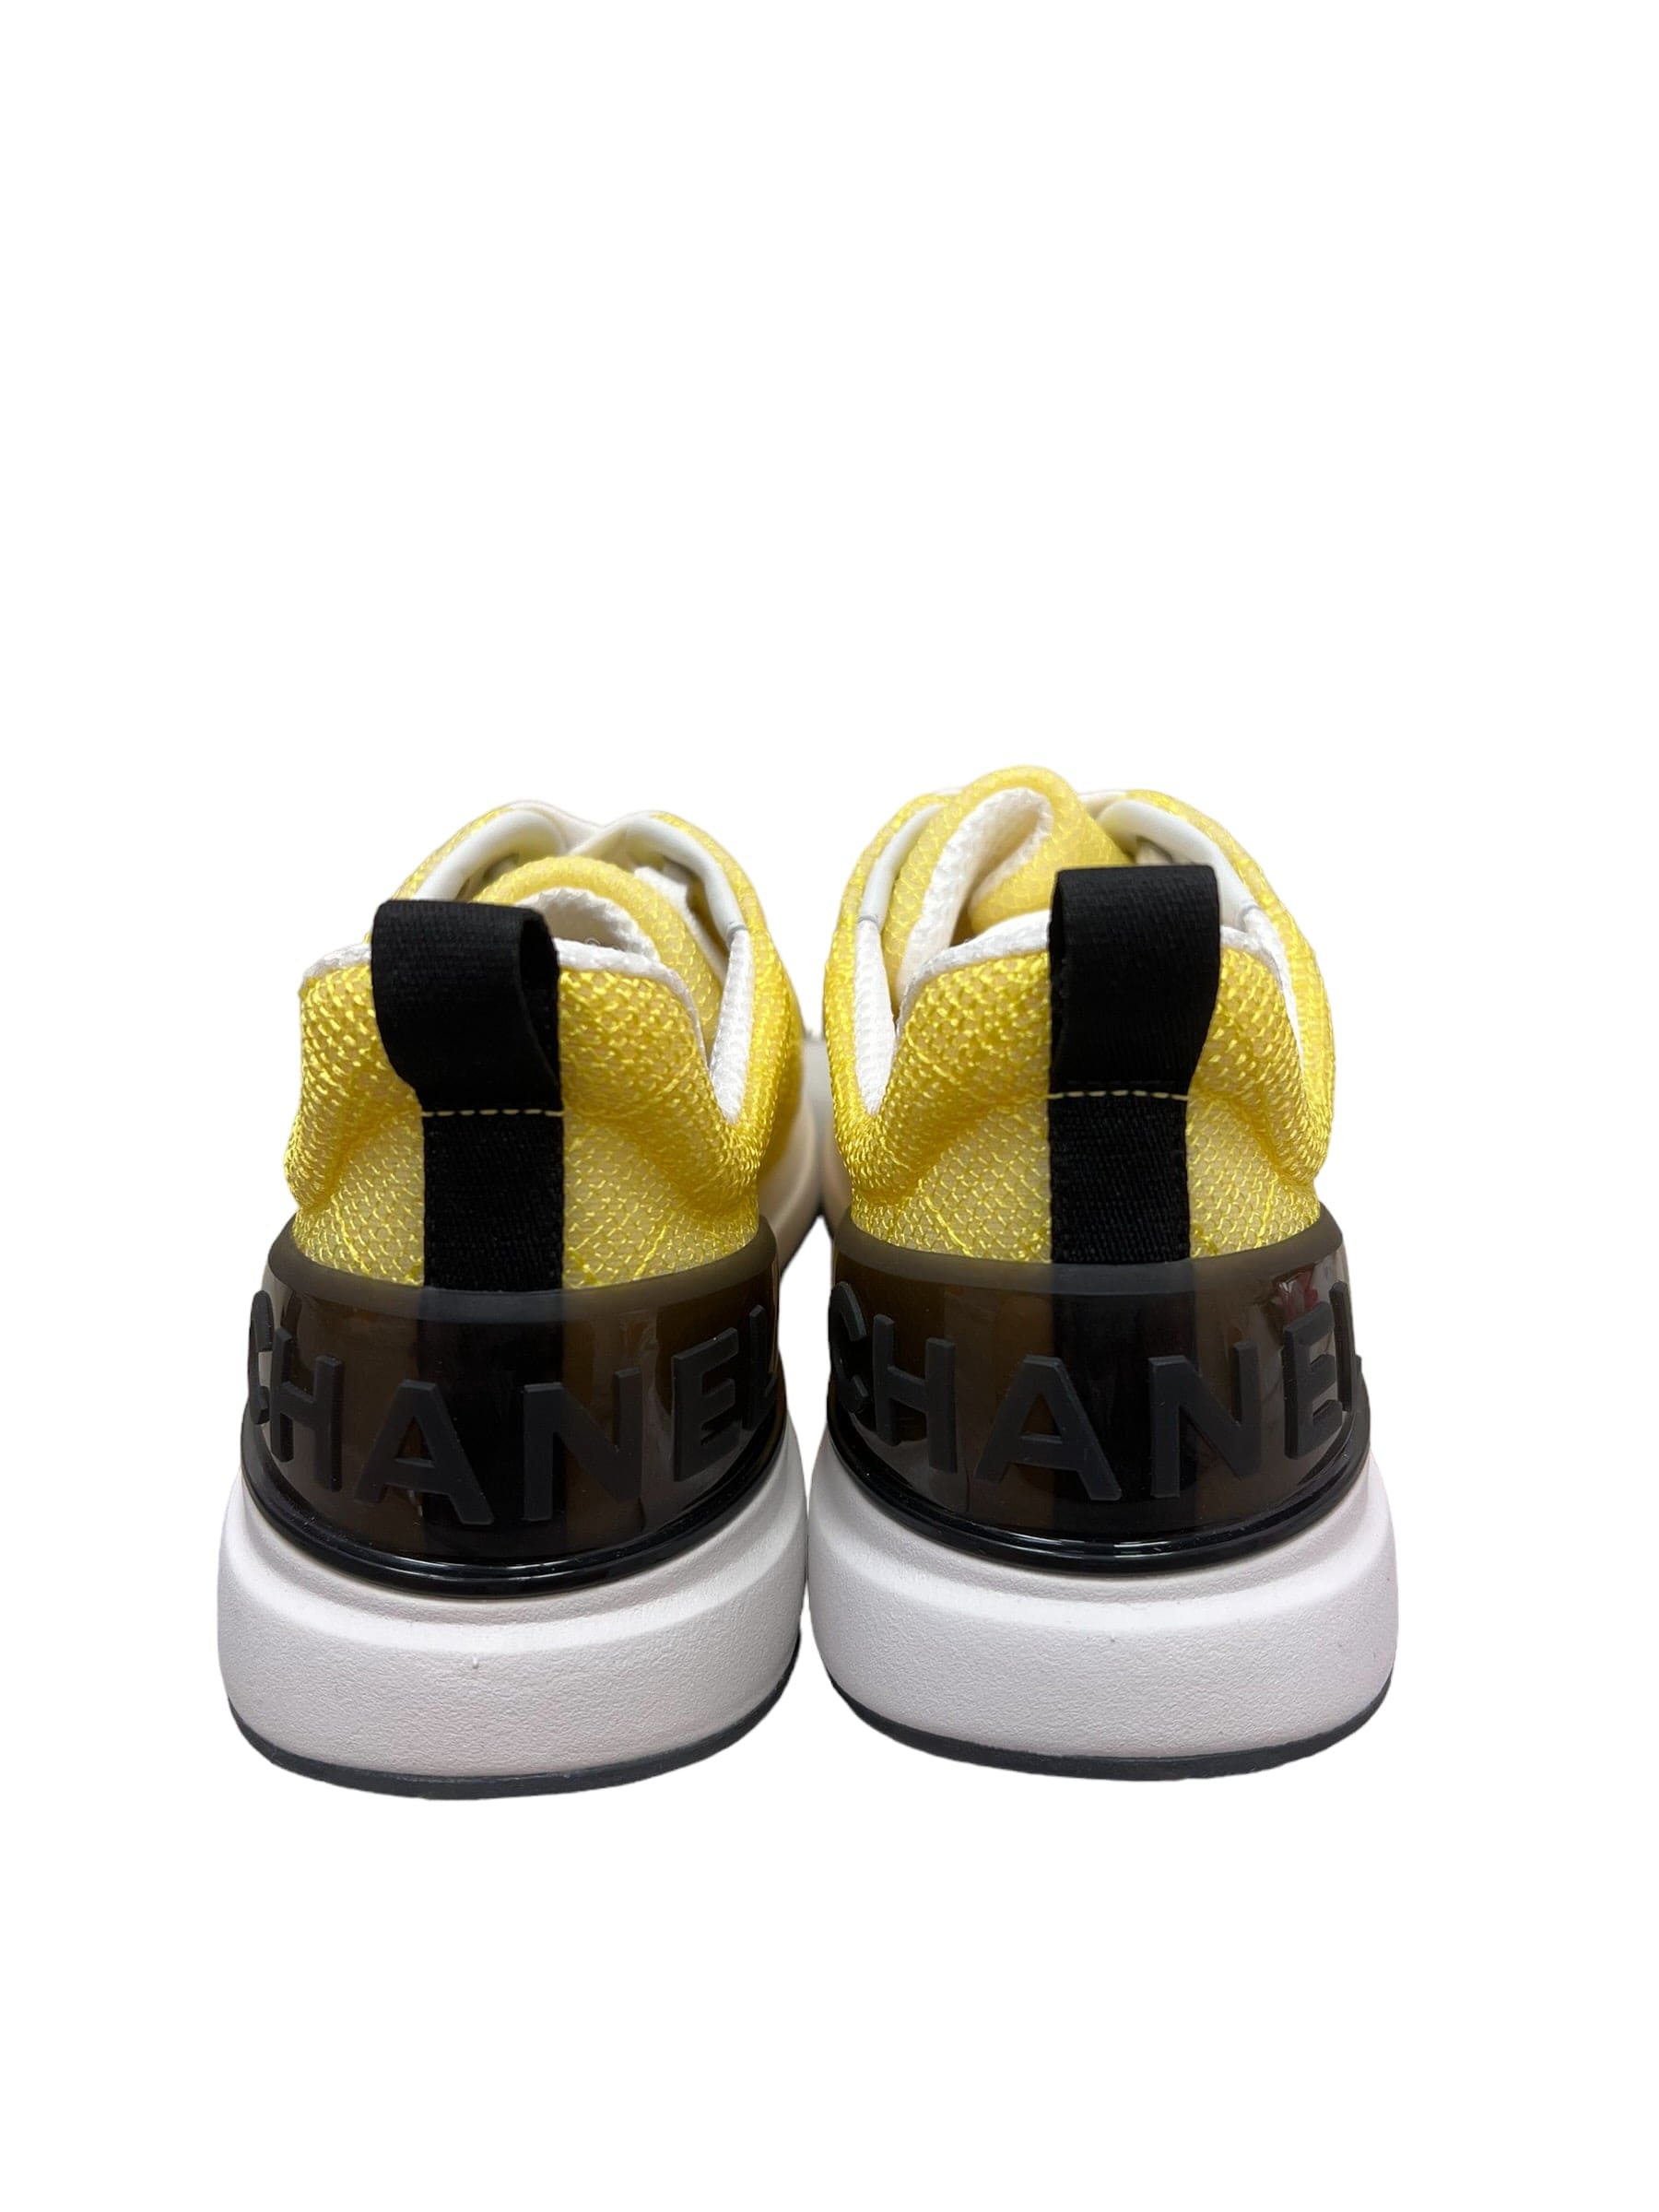 Chanel Chanel Trainers - Yellow Mesh Size 37 SKC1670